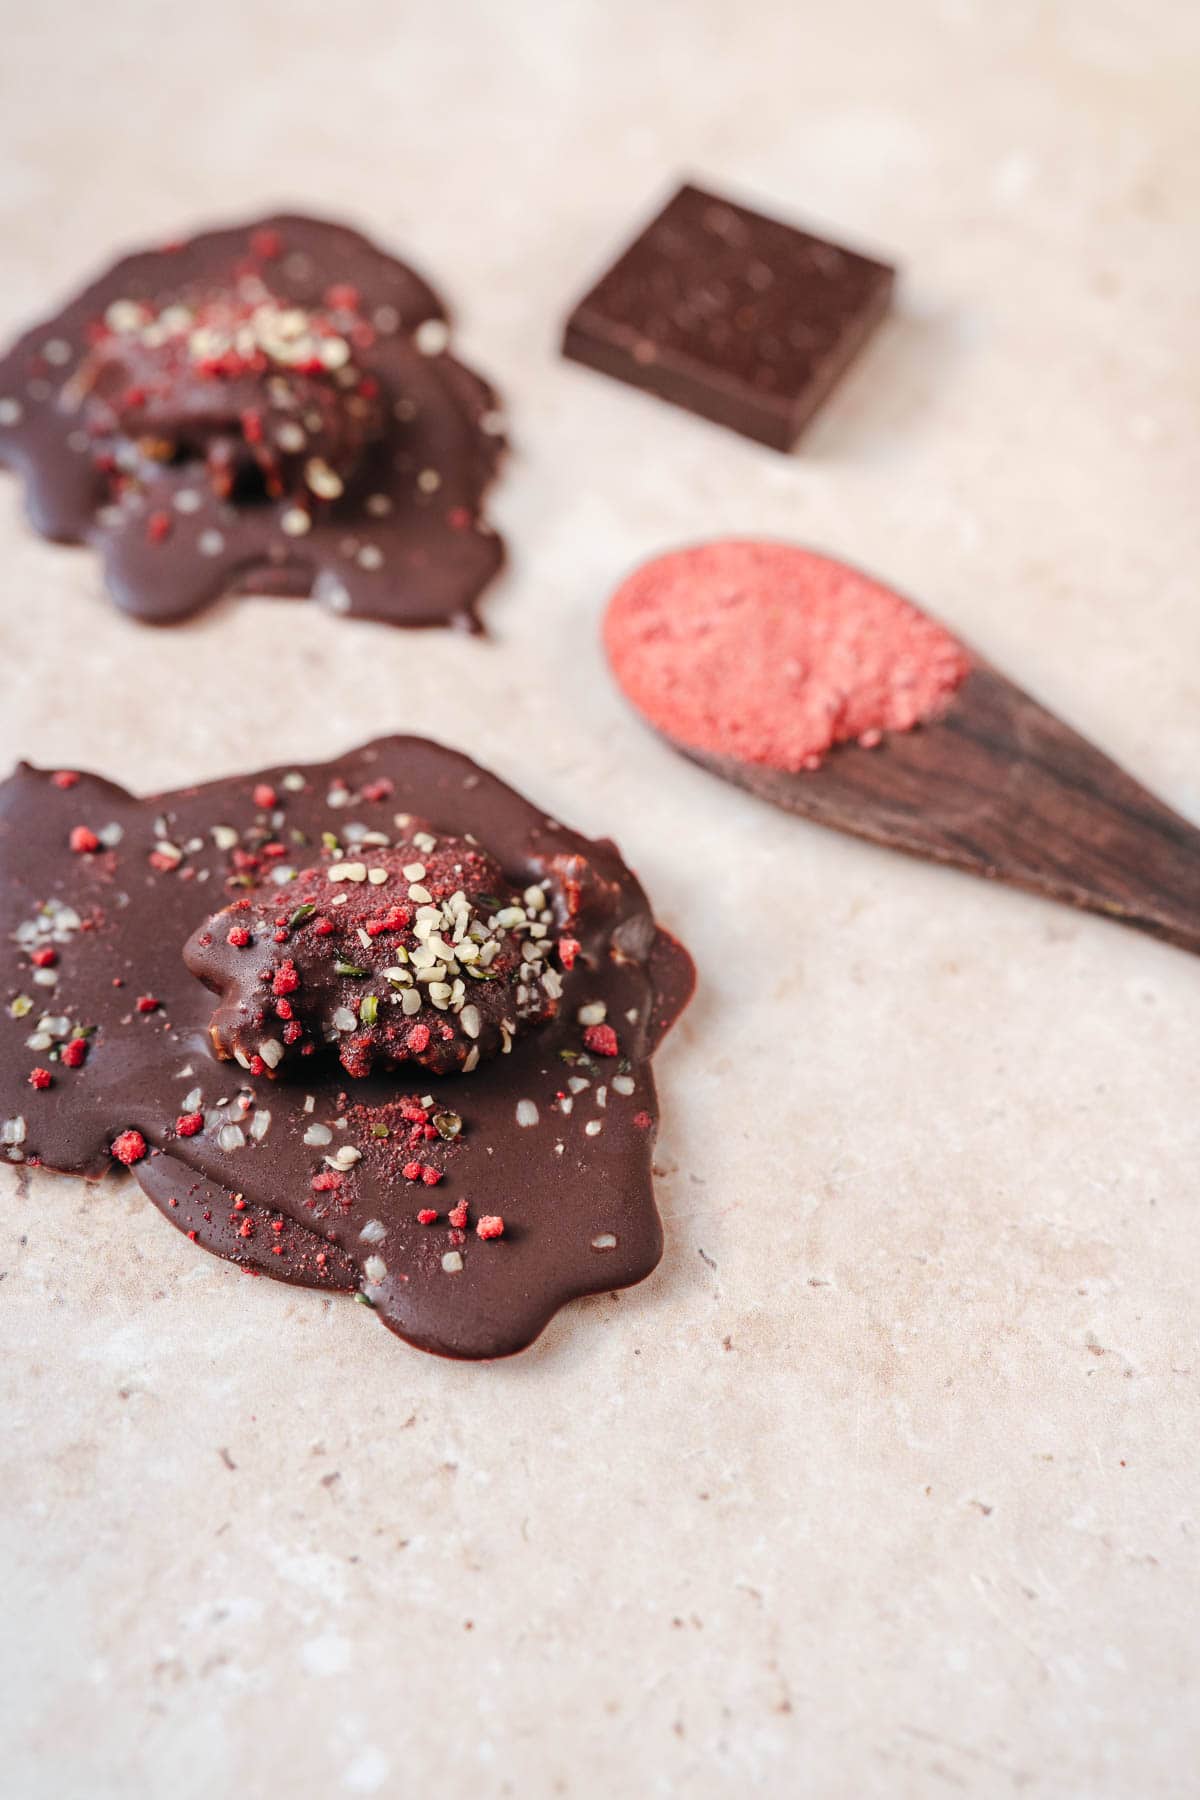 A close shot of a chocolate puddle topped with small hemp seeds and a dusting of pink strawberry powder.